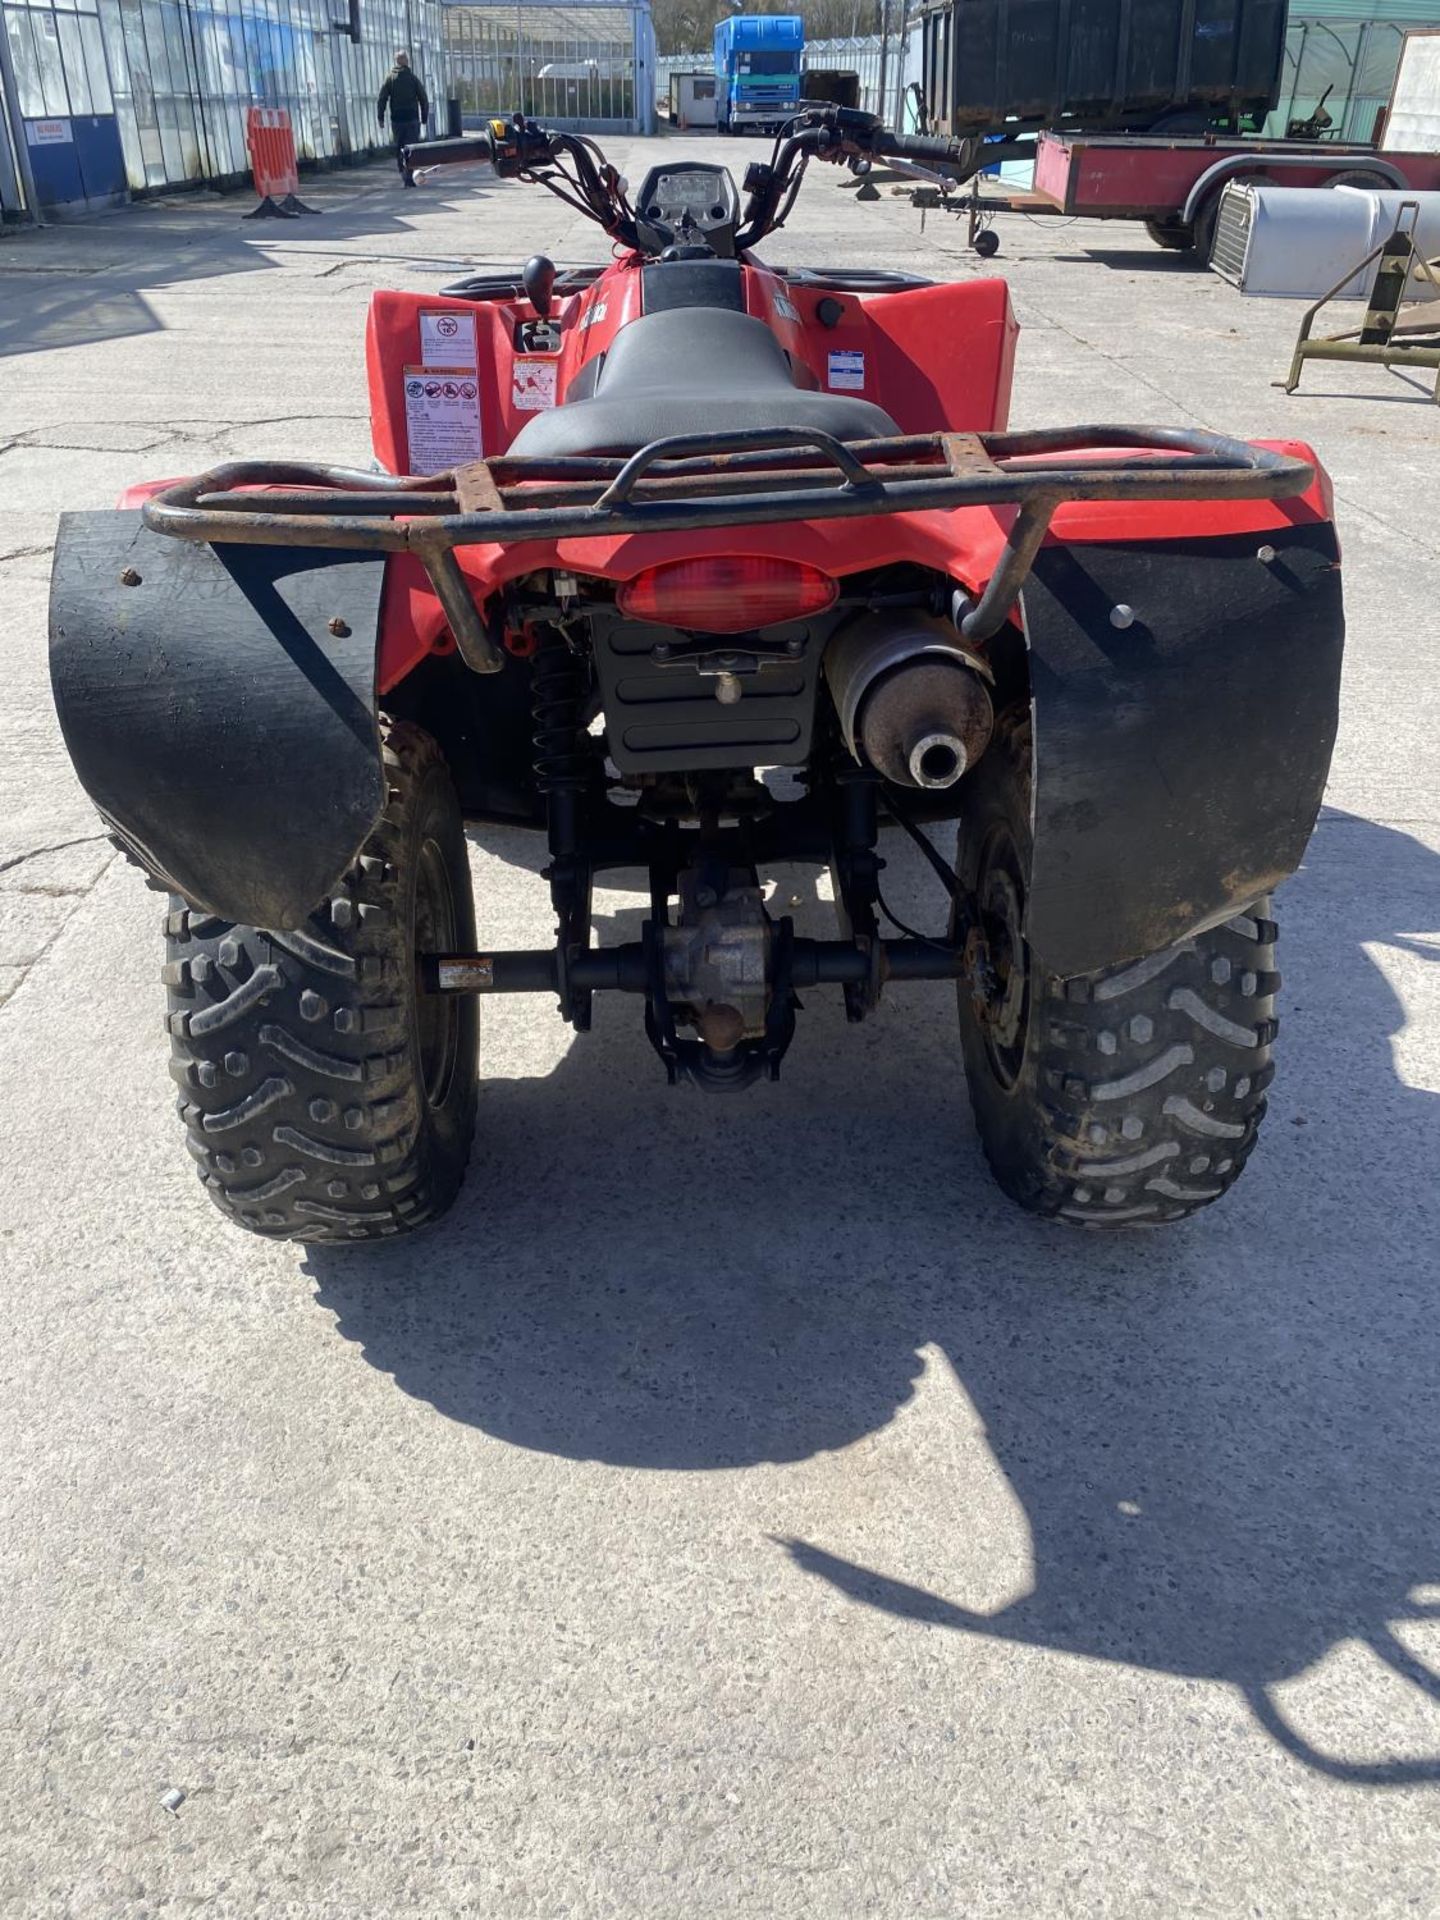 A 2013 SUZUKI KING QUAD, 400 CC AUTOMATIC - SEE VIDEO OF VEHICLE STARTING AND RUNNING - NO VAT - Image 7 of 12